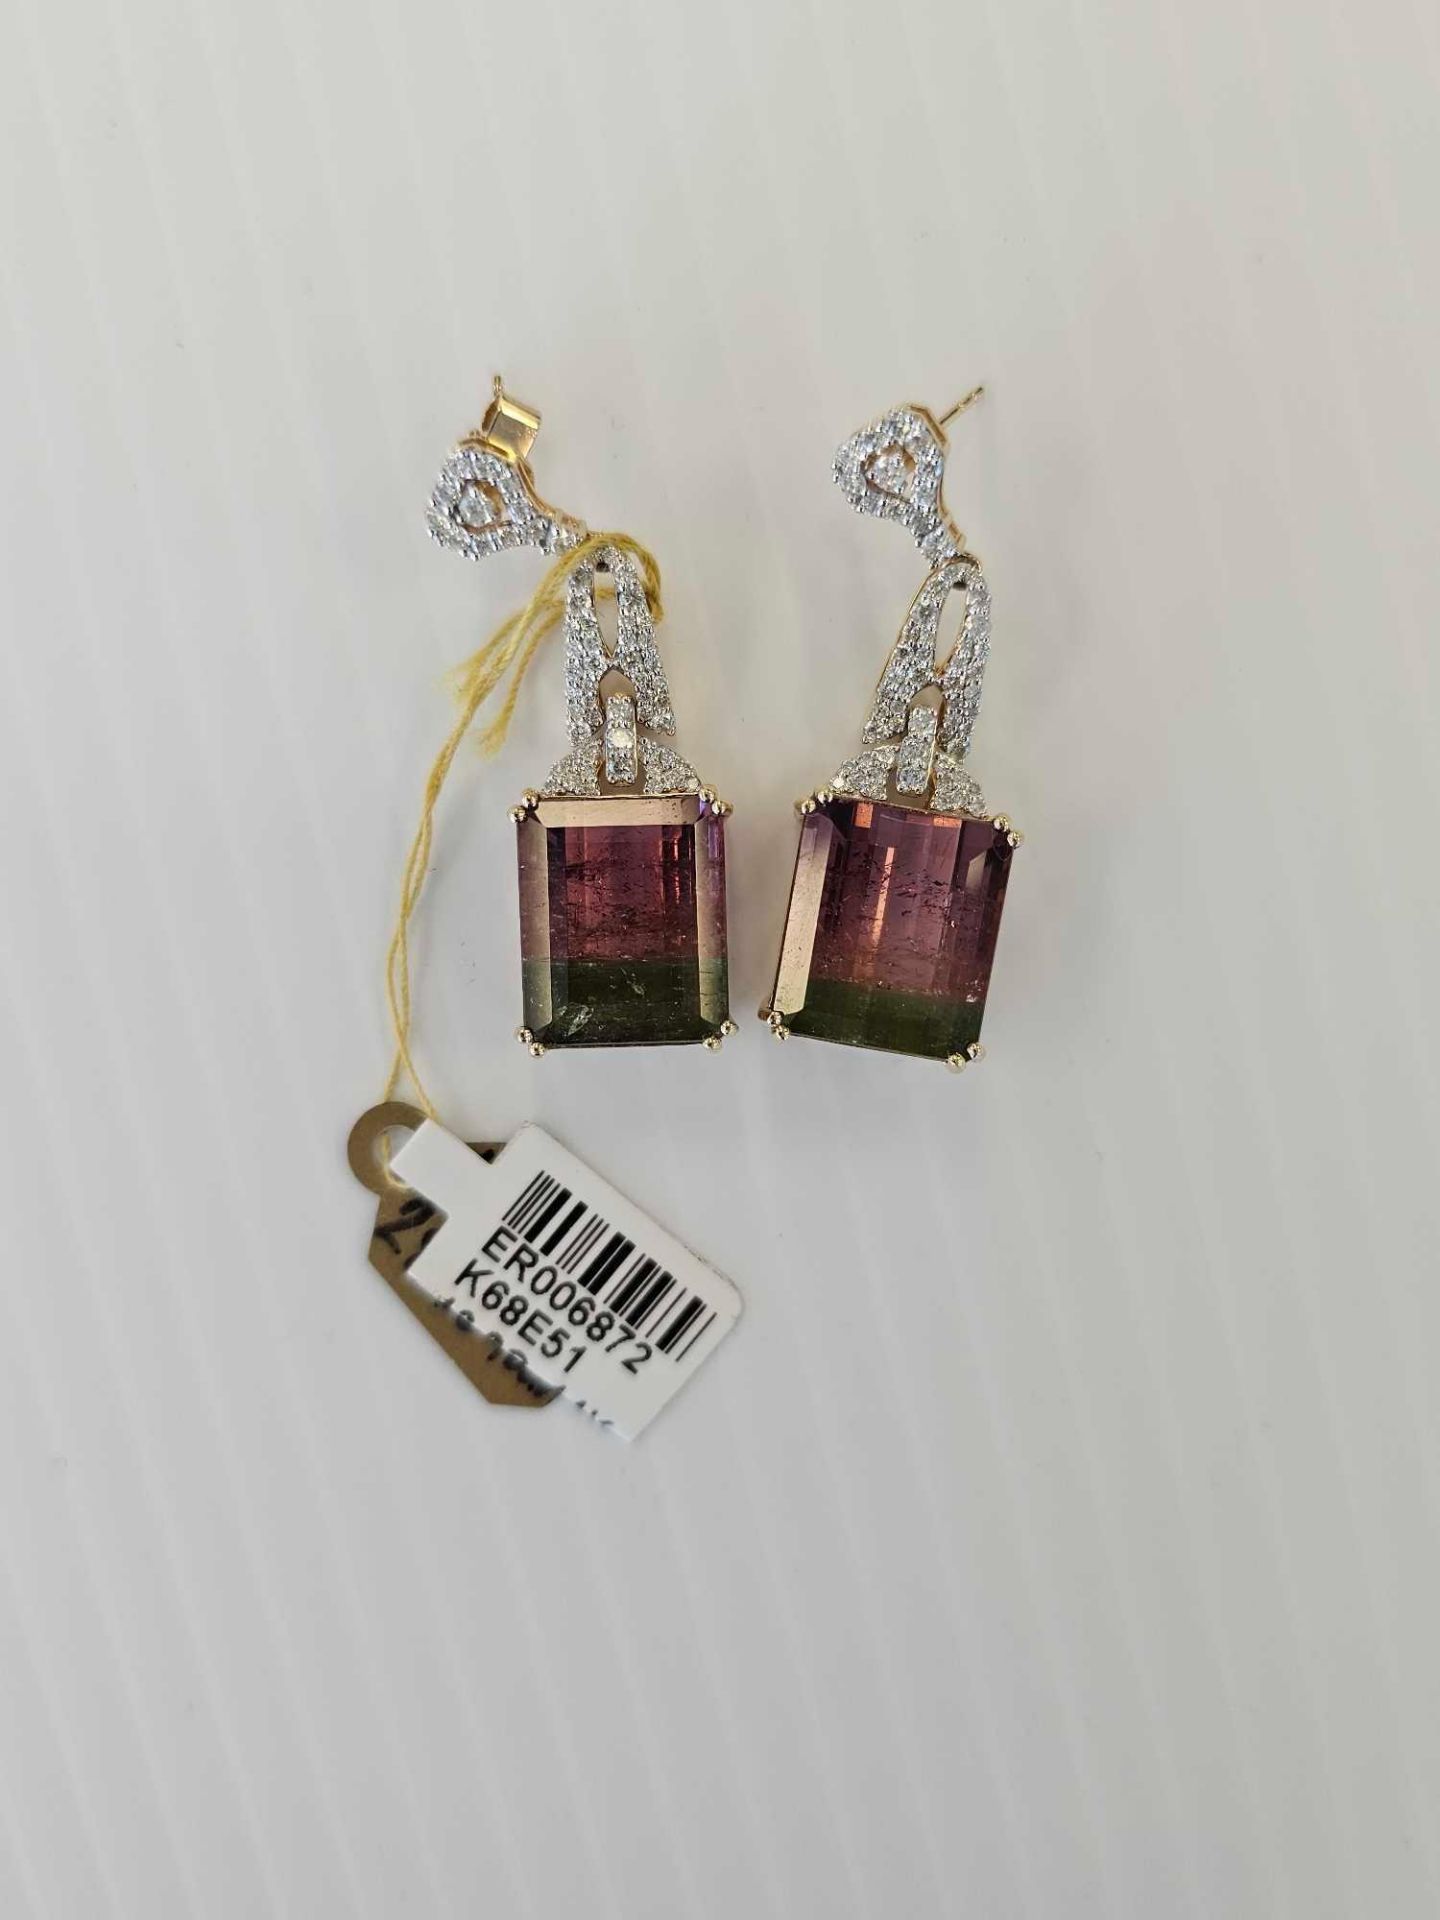 14kt yellow gold 28 ctw tourmaline and 1.24 ctw diamond earrings